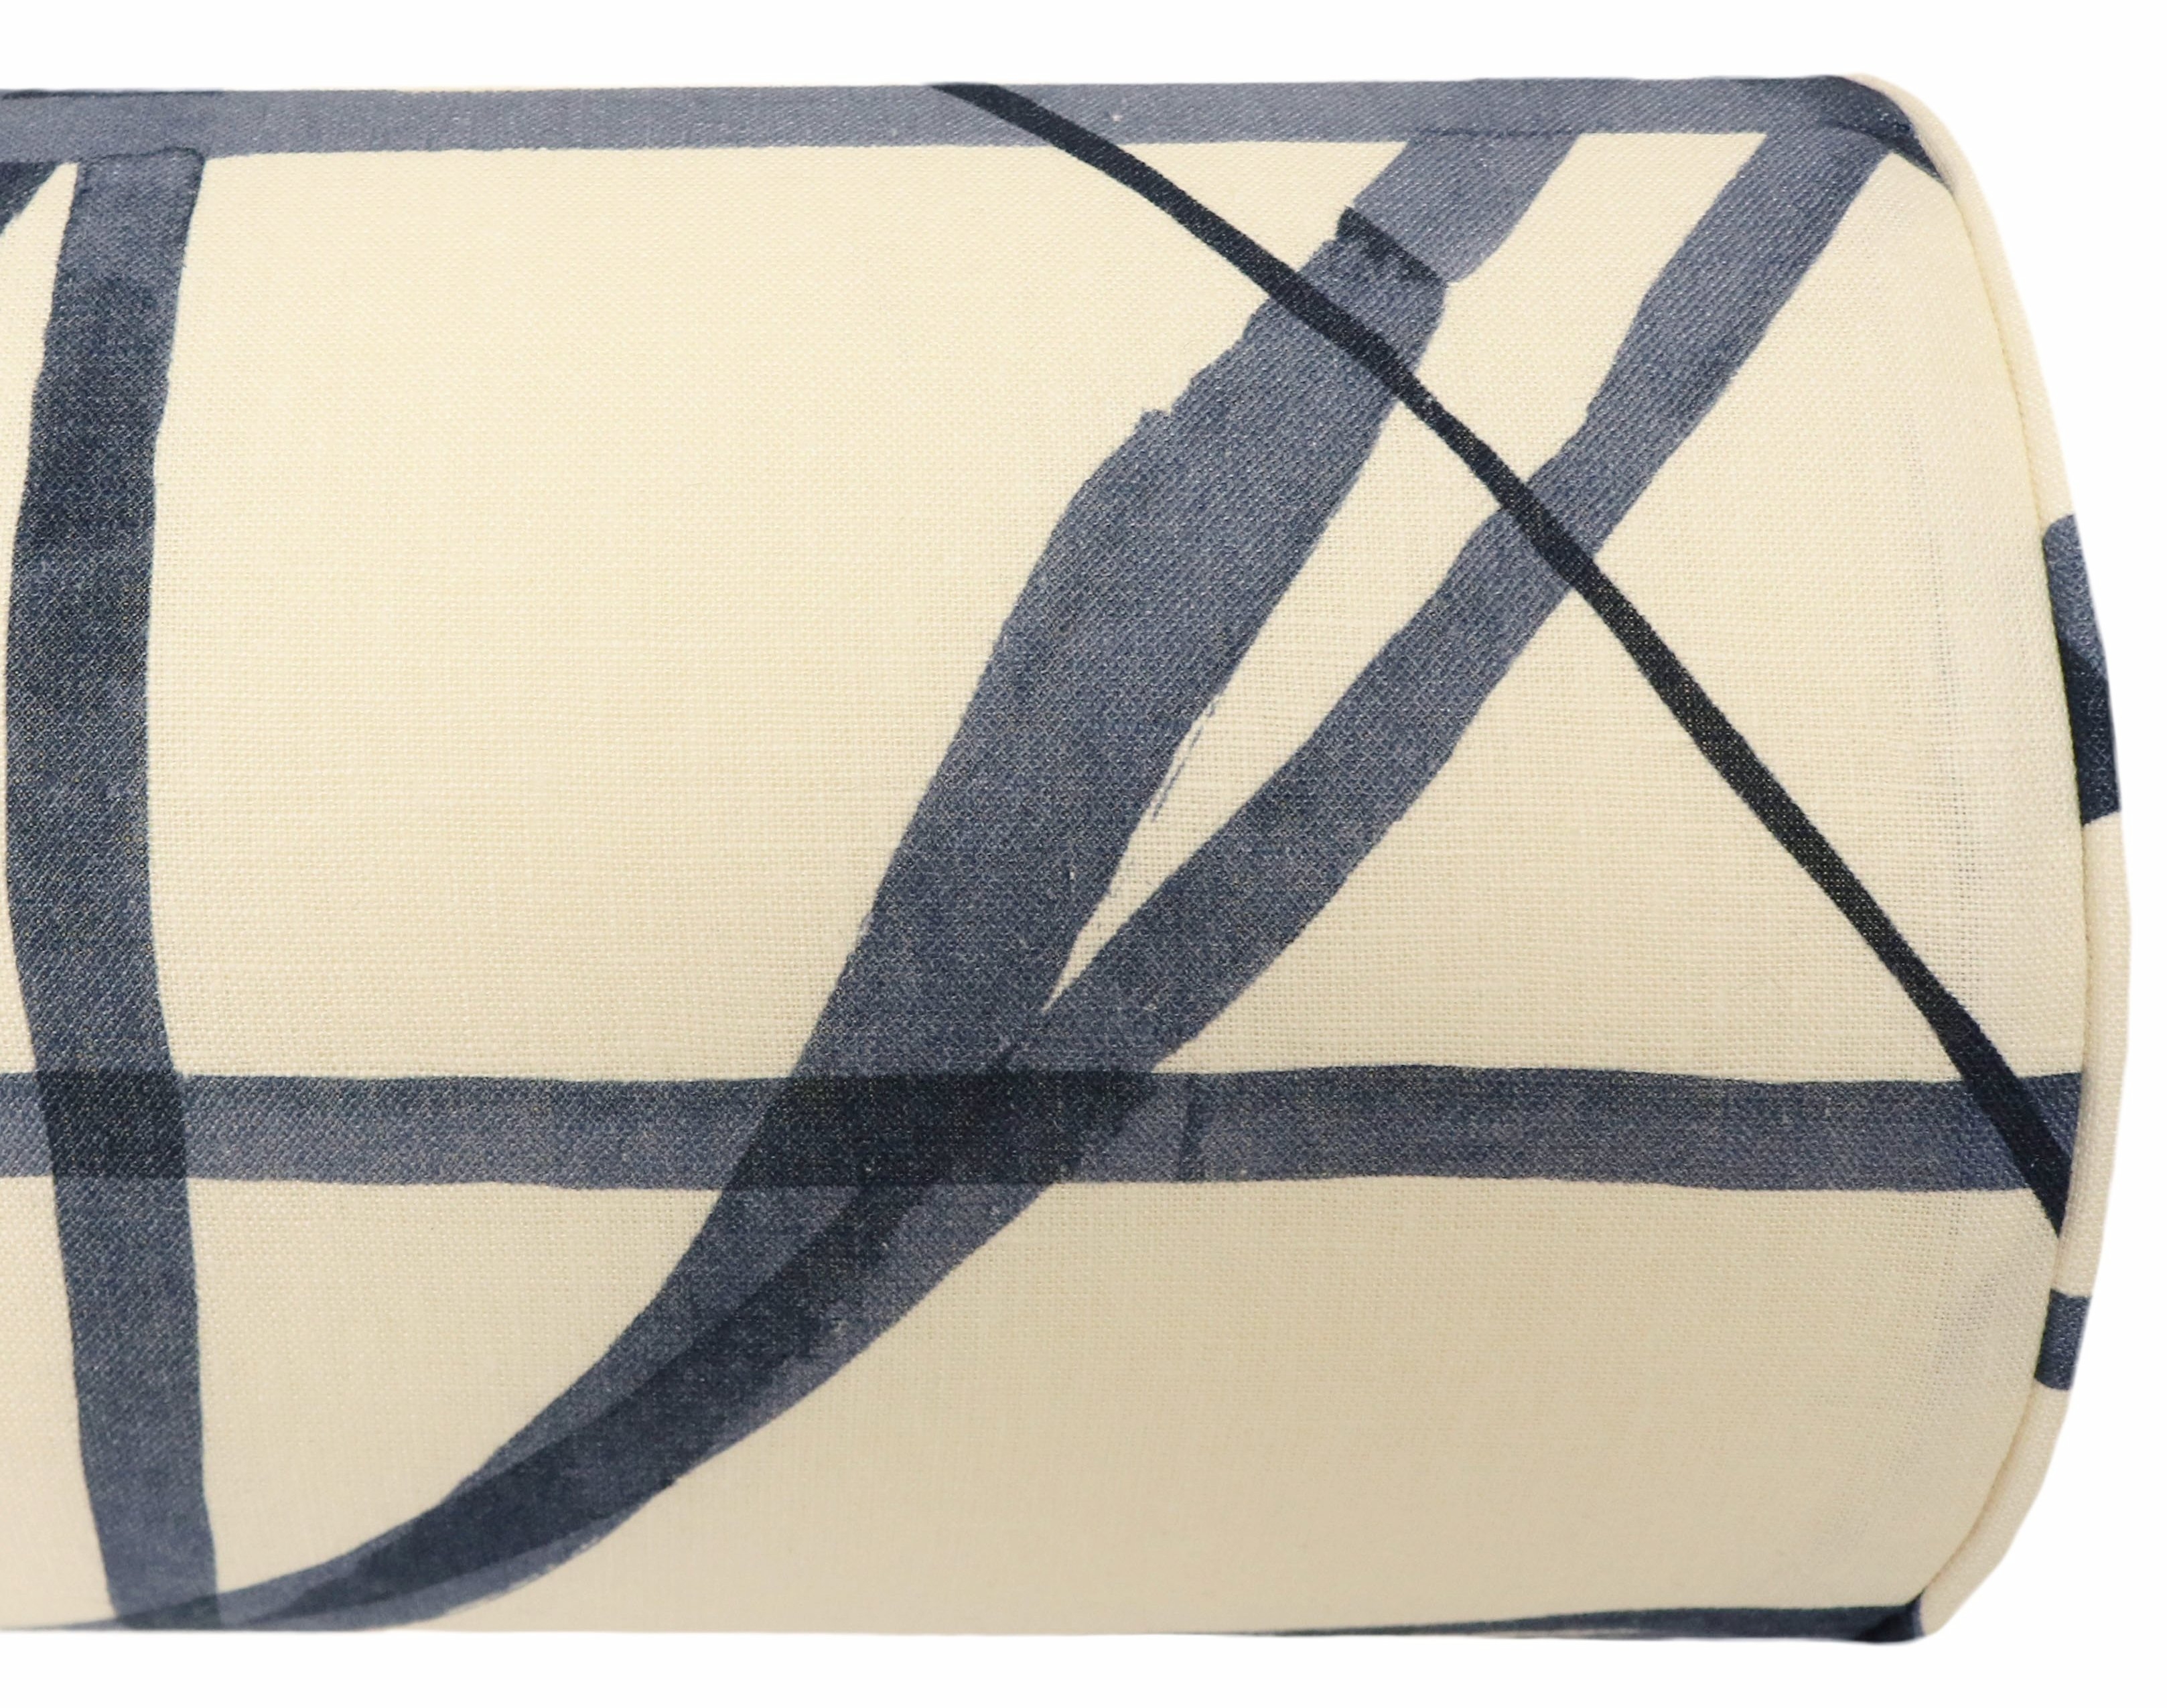 THE BOLSTER :: CHANNELS // PERIWINKLE - TWIN XL // 9" X 30" - Image 3